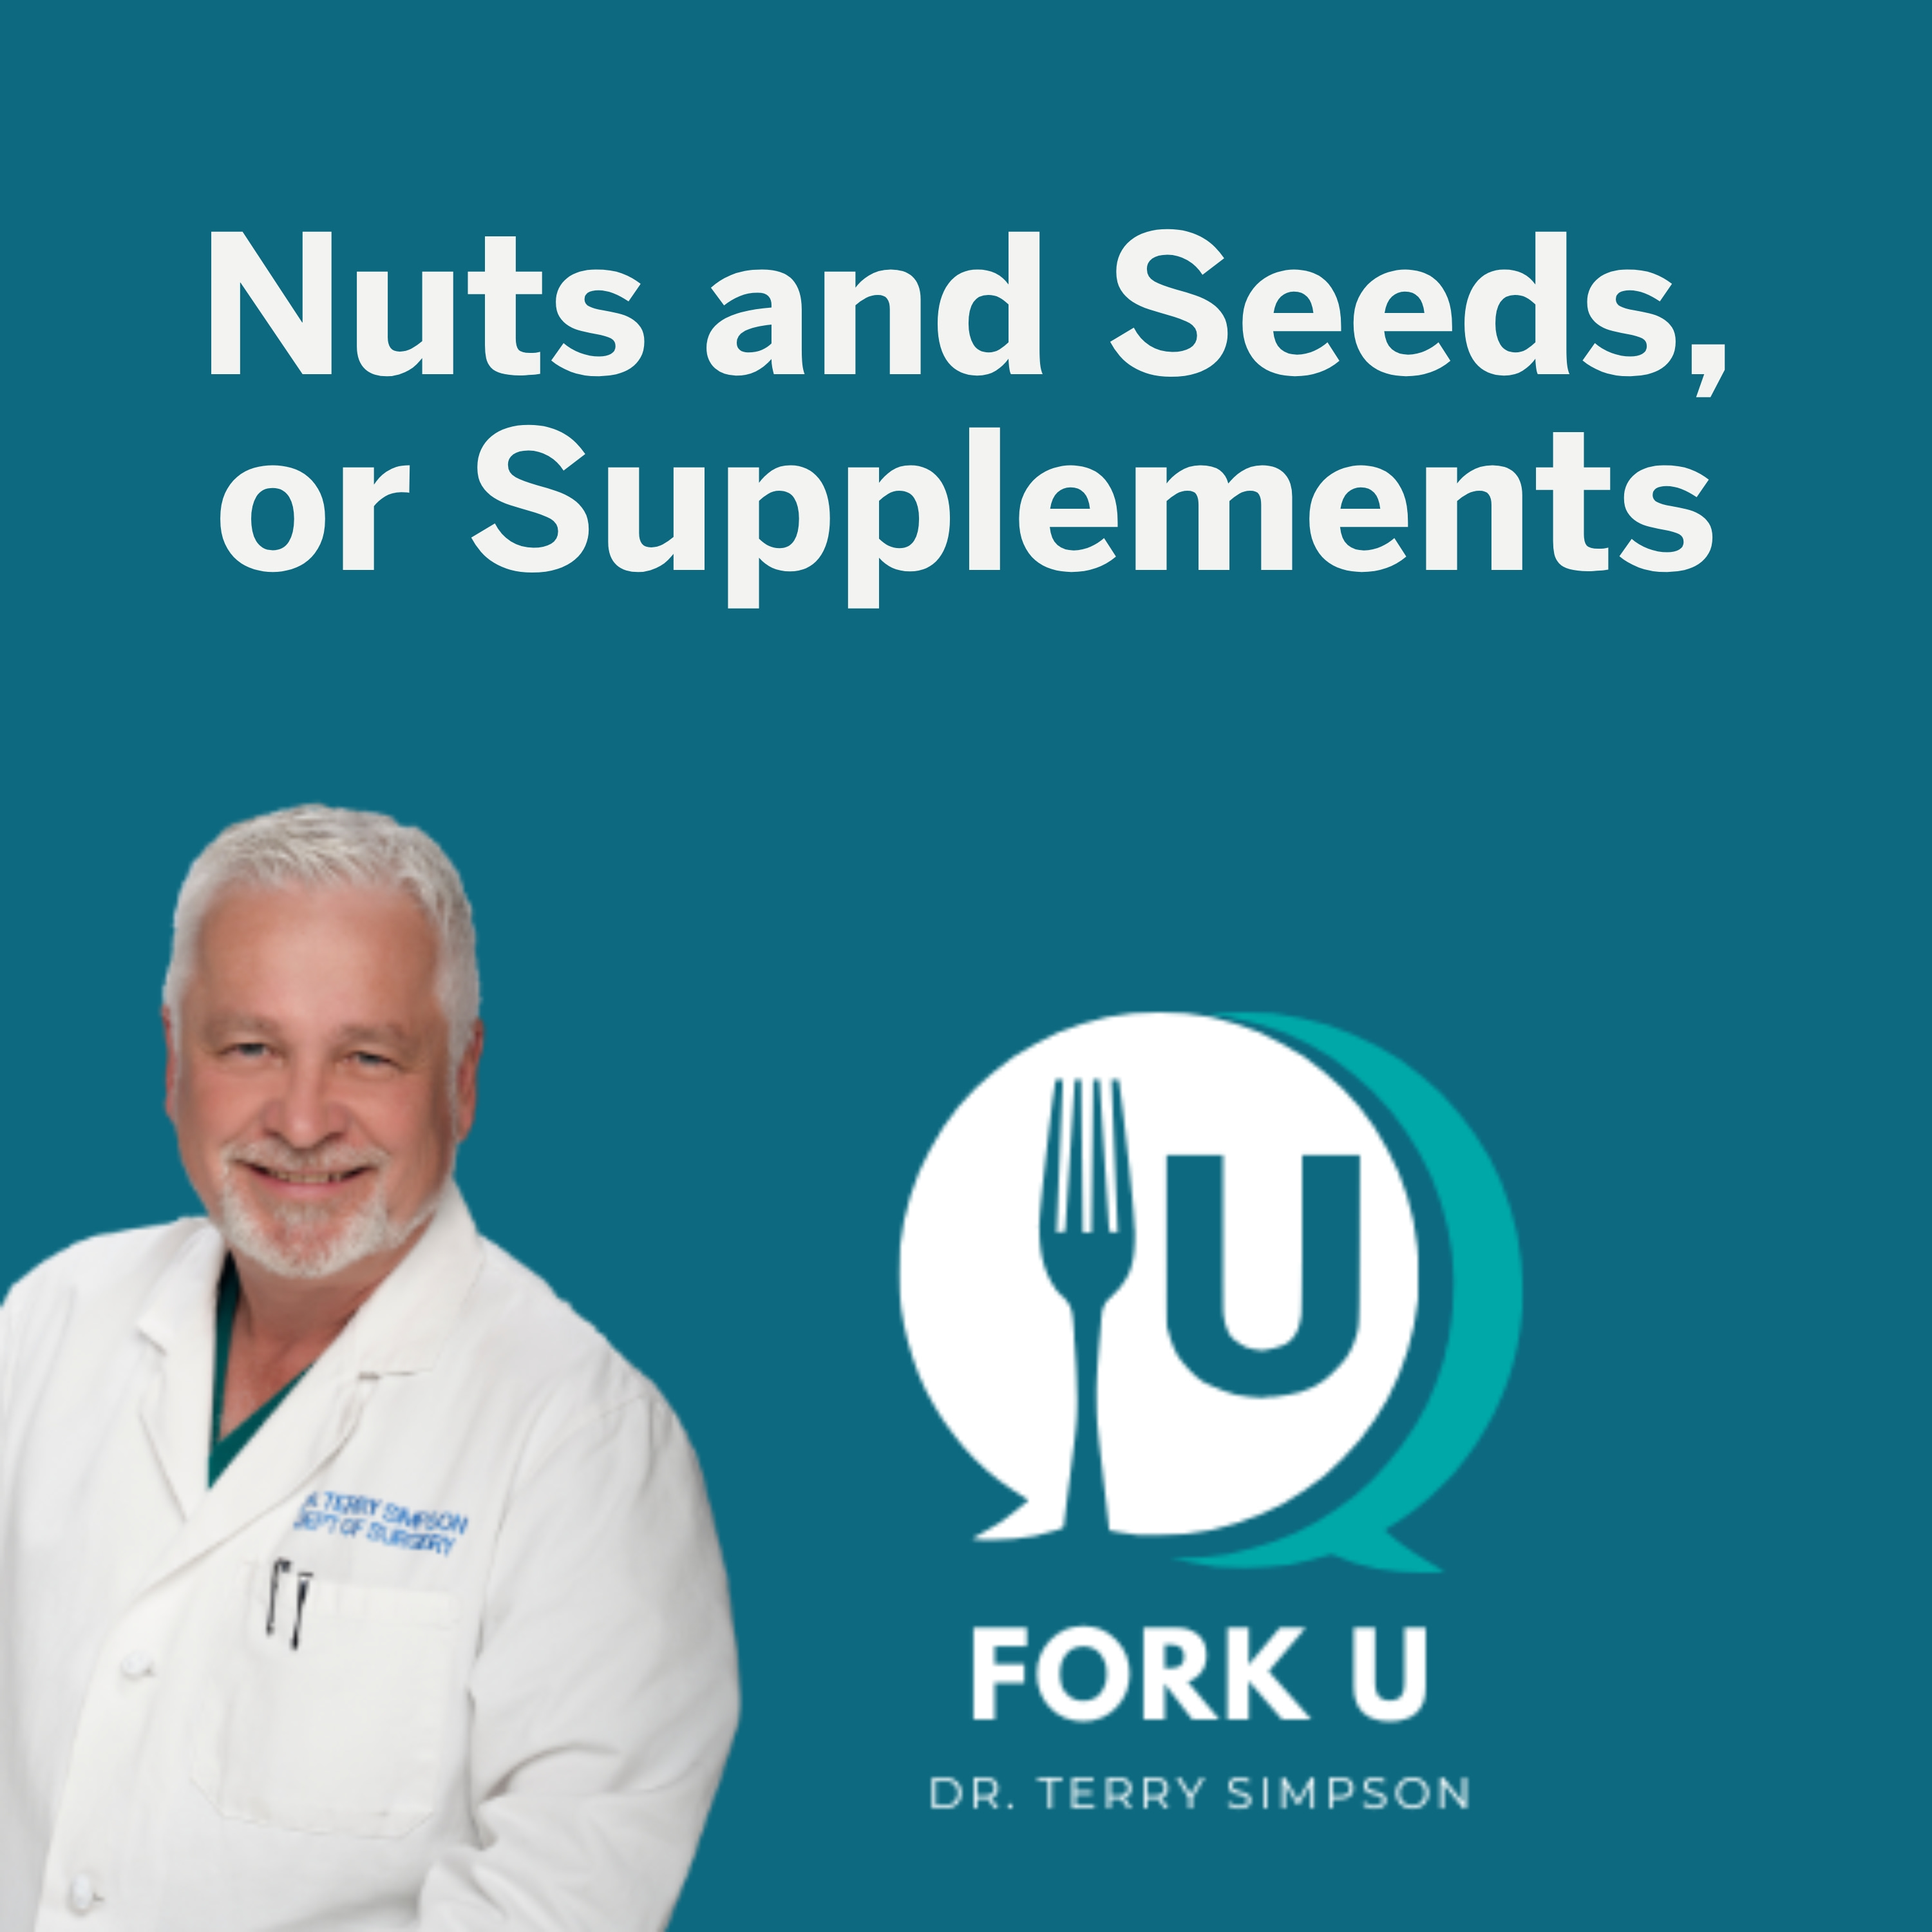 Nuts and Seeds, or Supplements